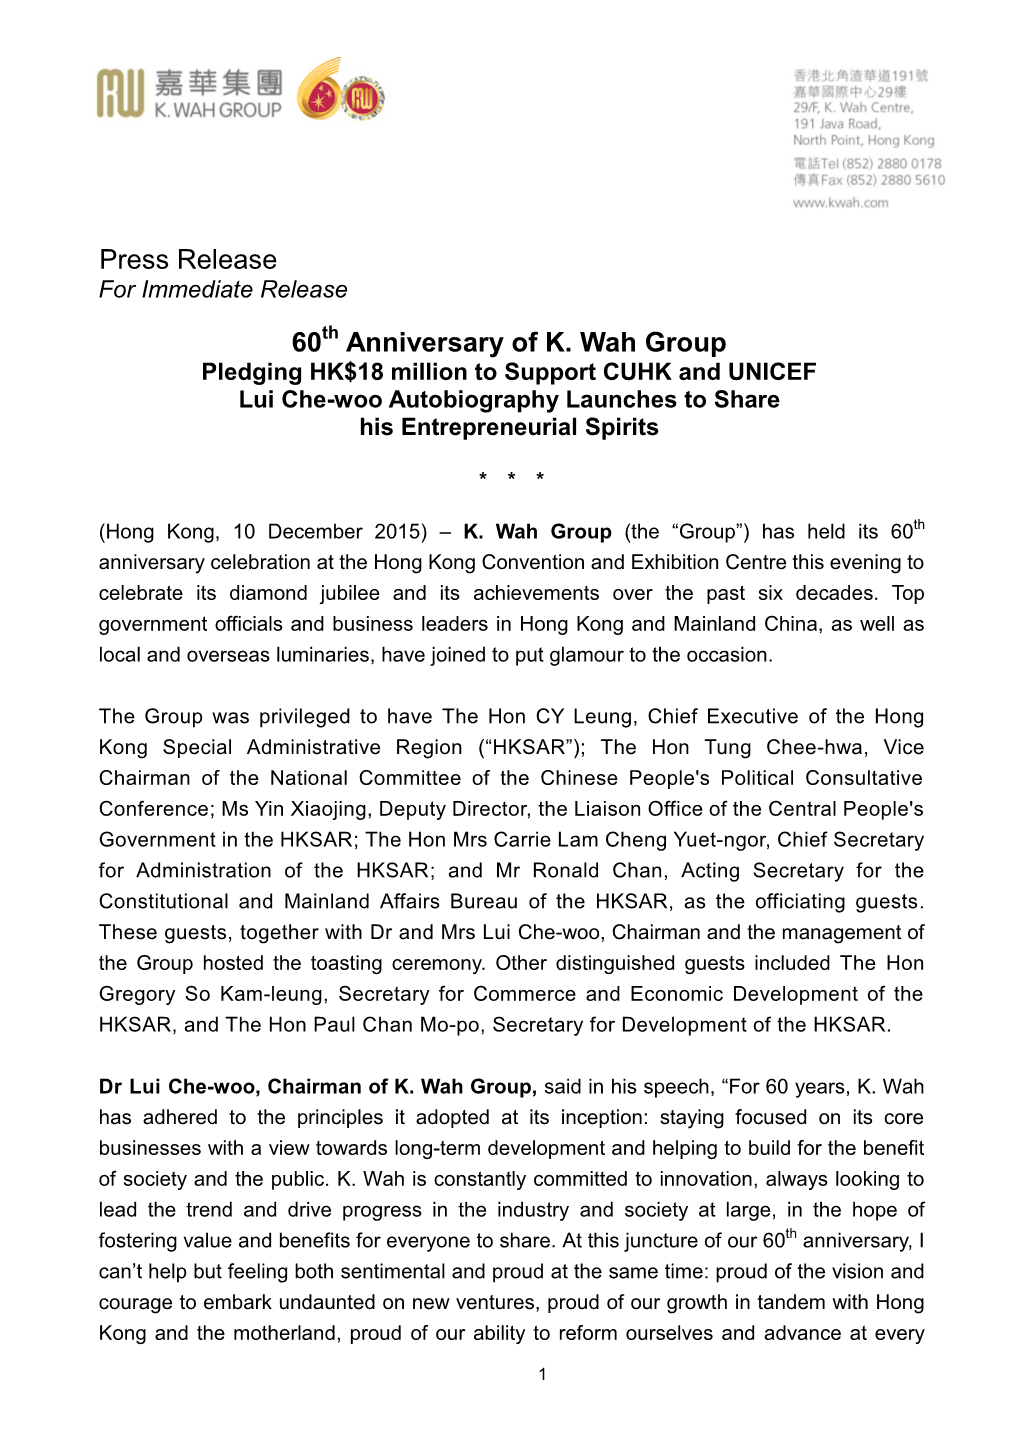 Press Release 60 Anniversary of K. Wah Group